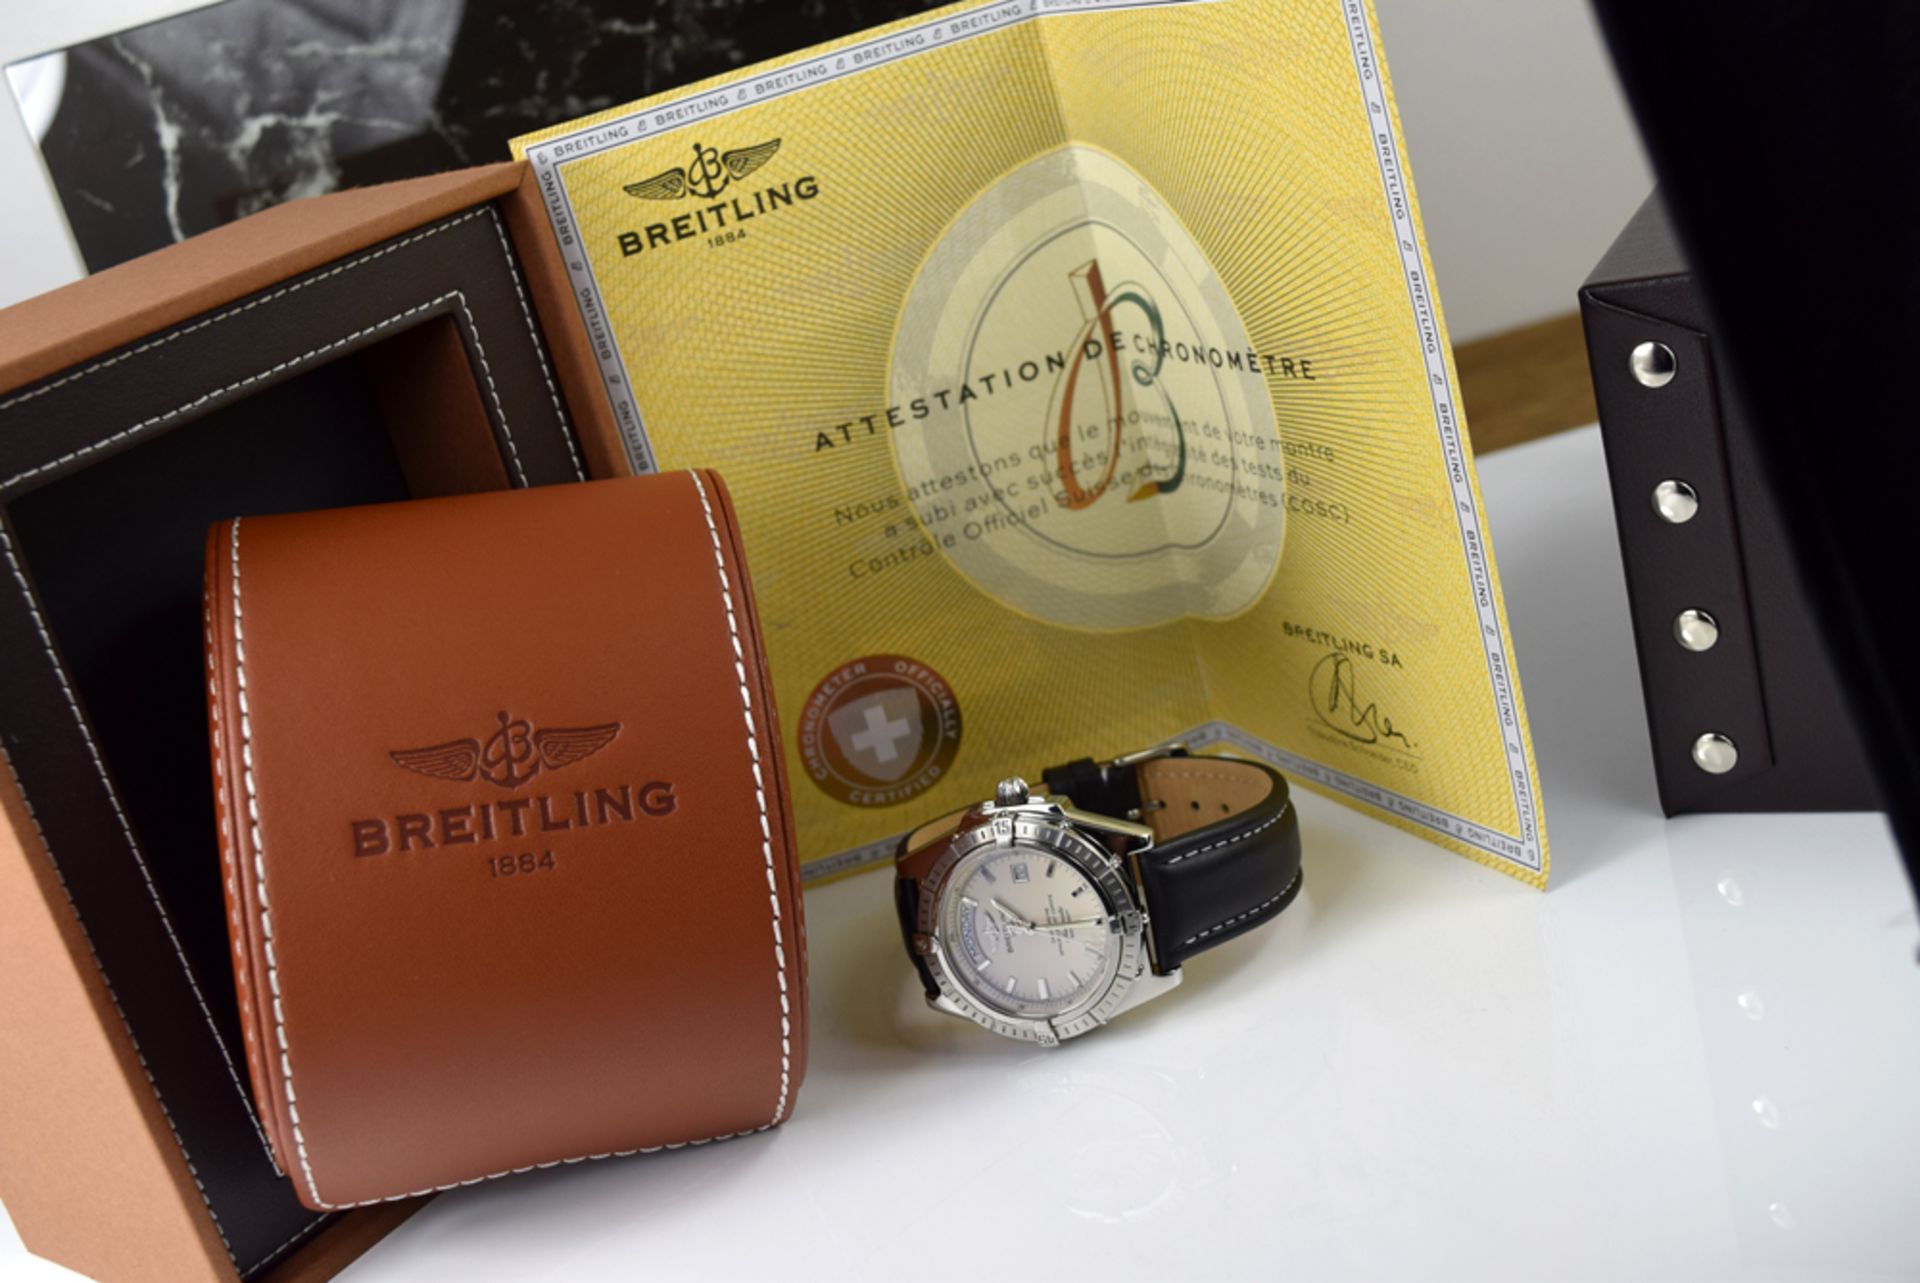 BREITLING 'DAY-DATE' WINDRIDER - STEEL (A45355) - Image 3 of 7